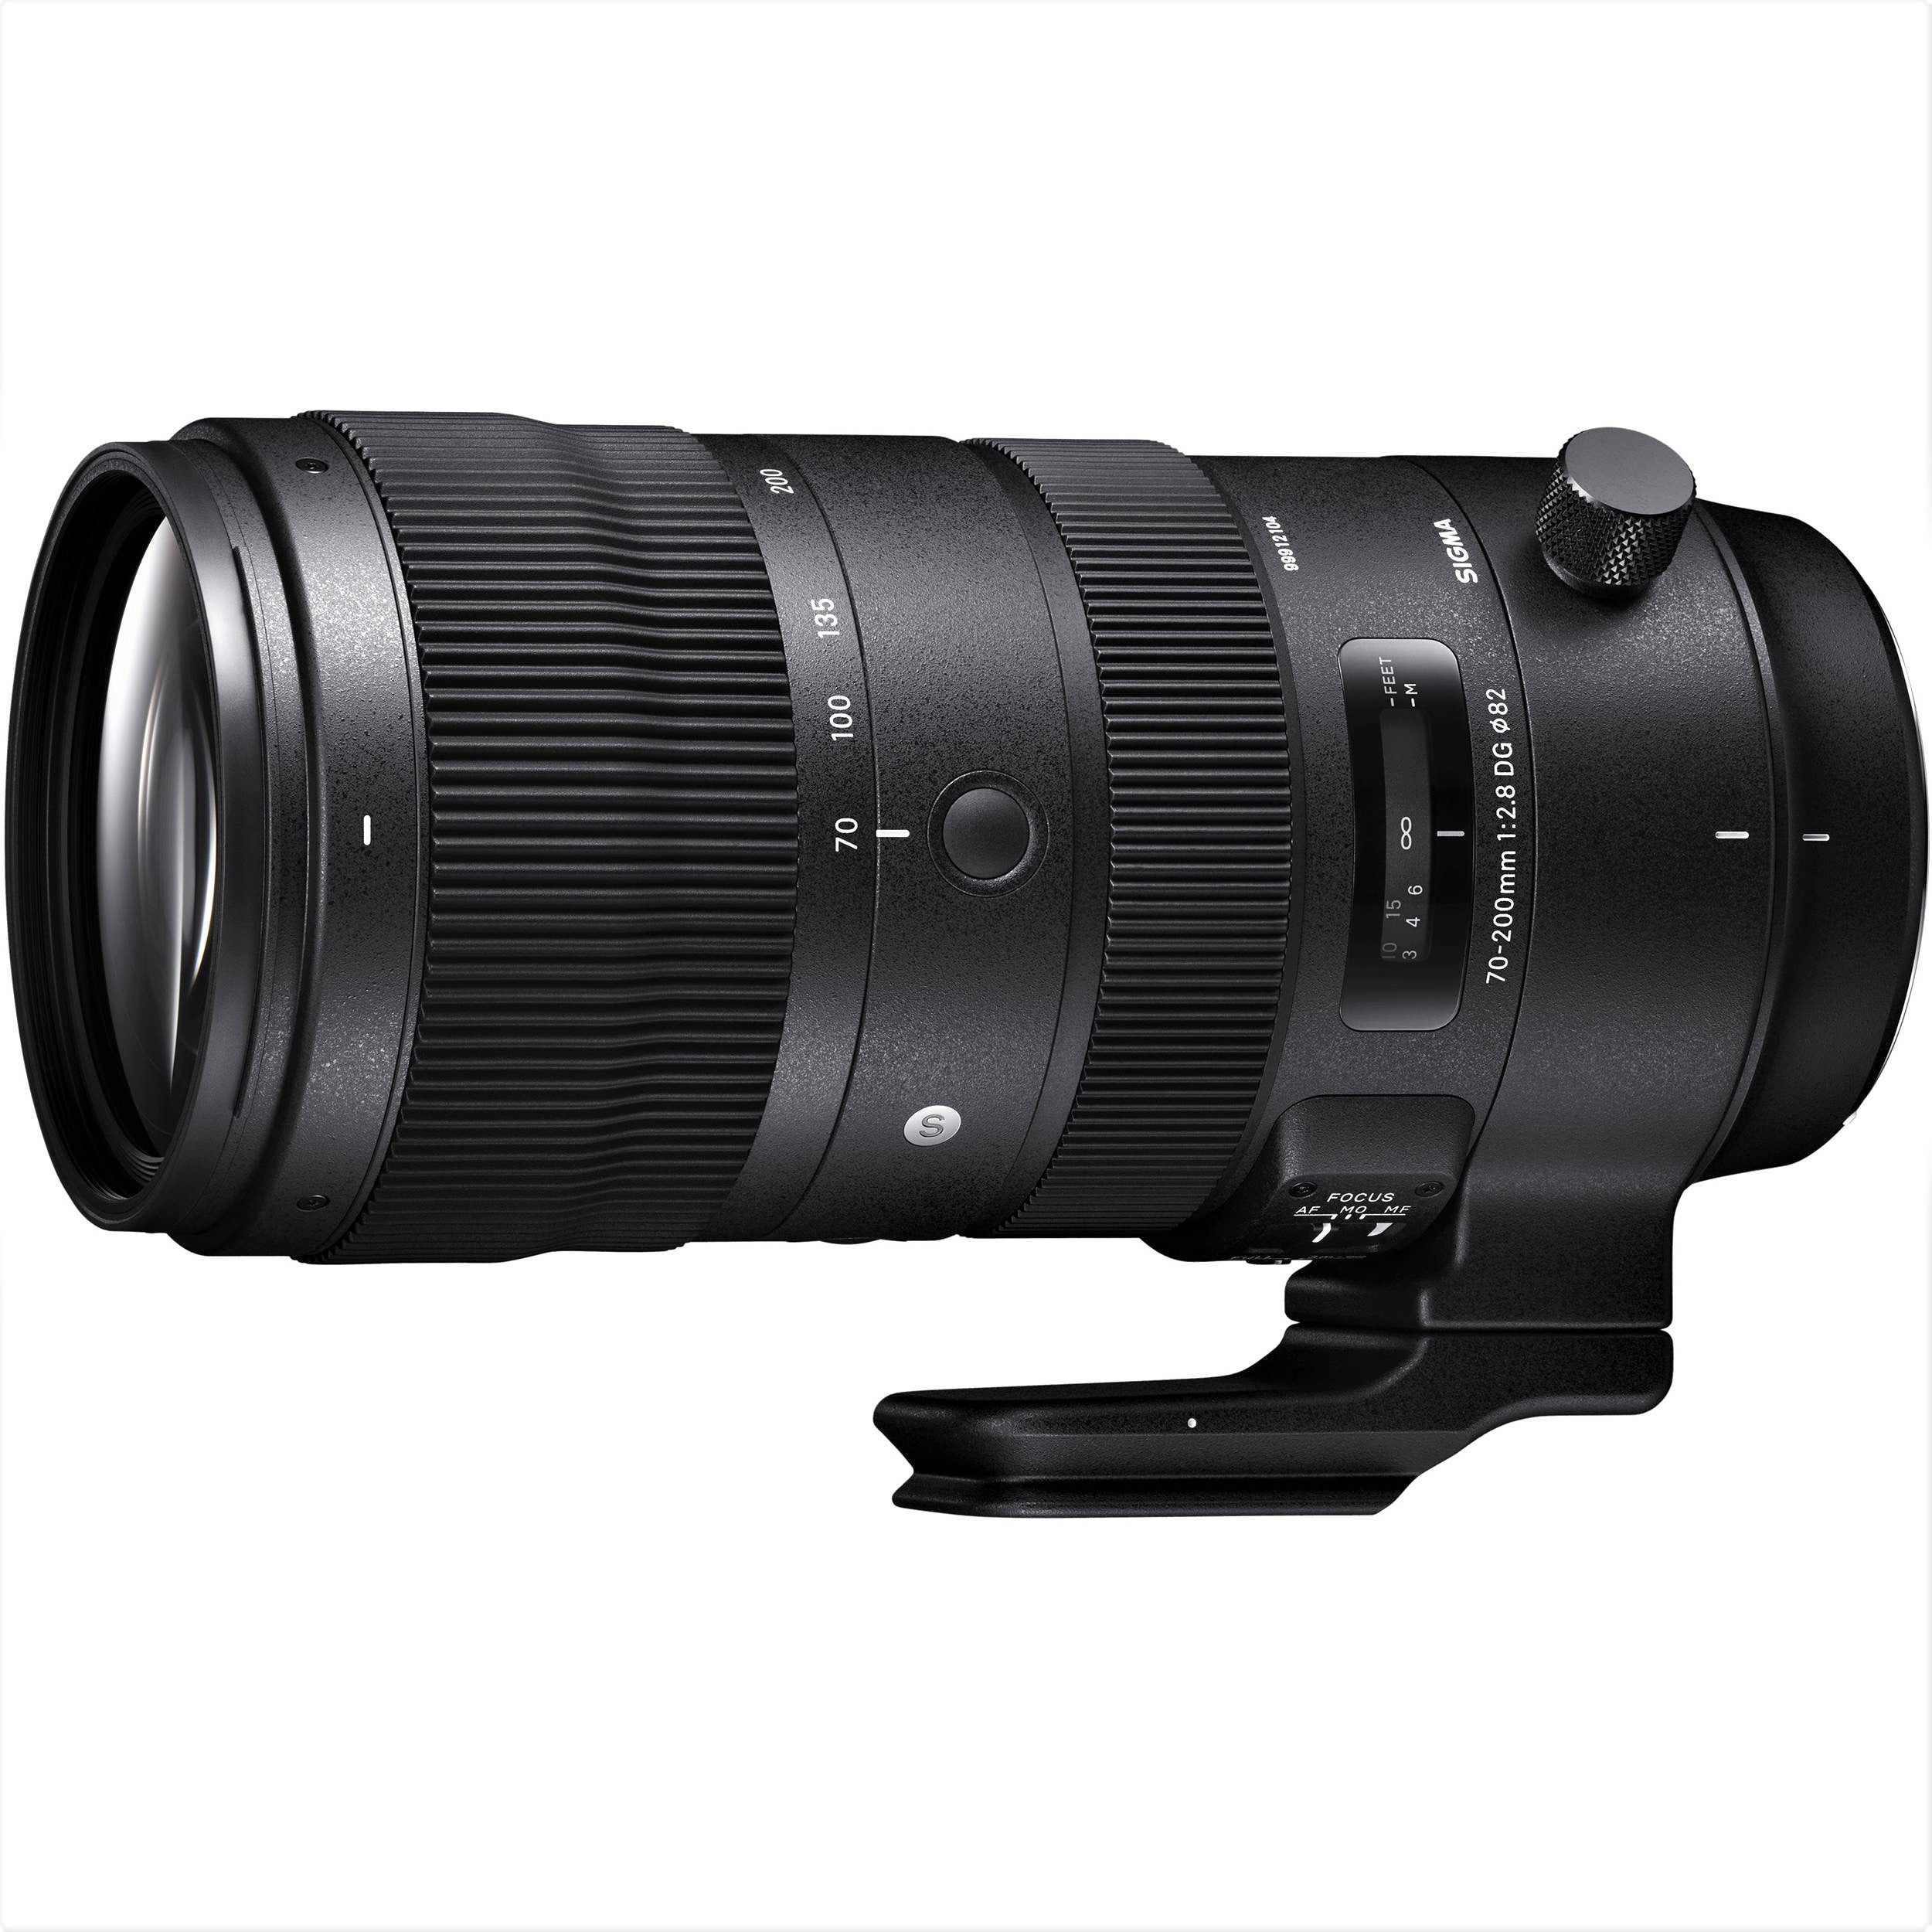 Sigma 70-200mm F2.8 DG OS HSM Sports Lens (Sigma SA Mount) with Attached Tripod Socket